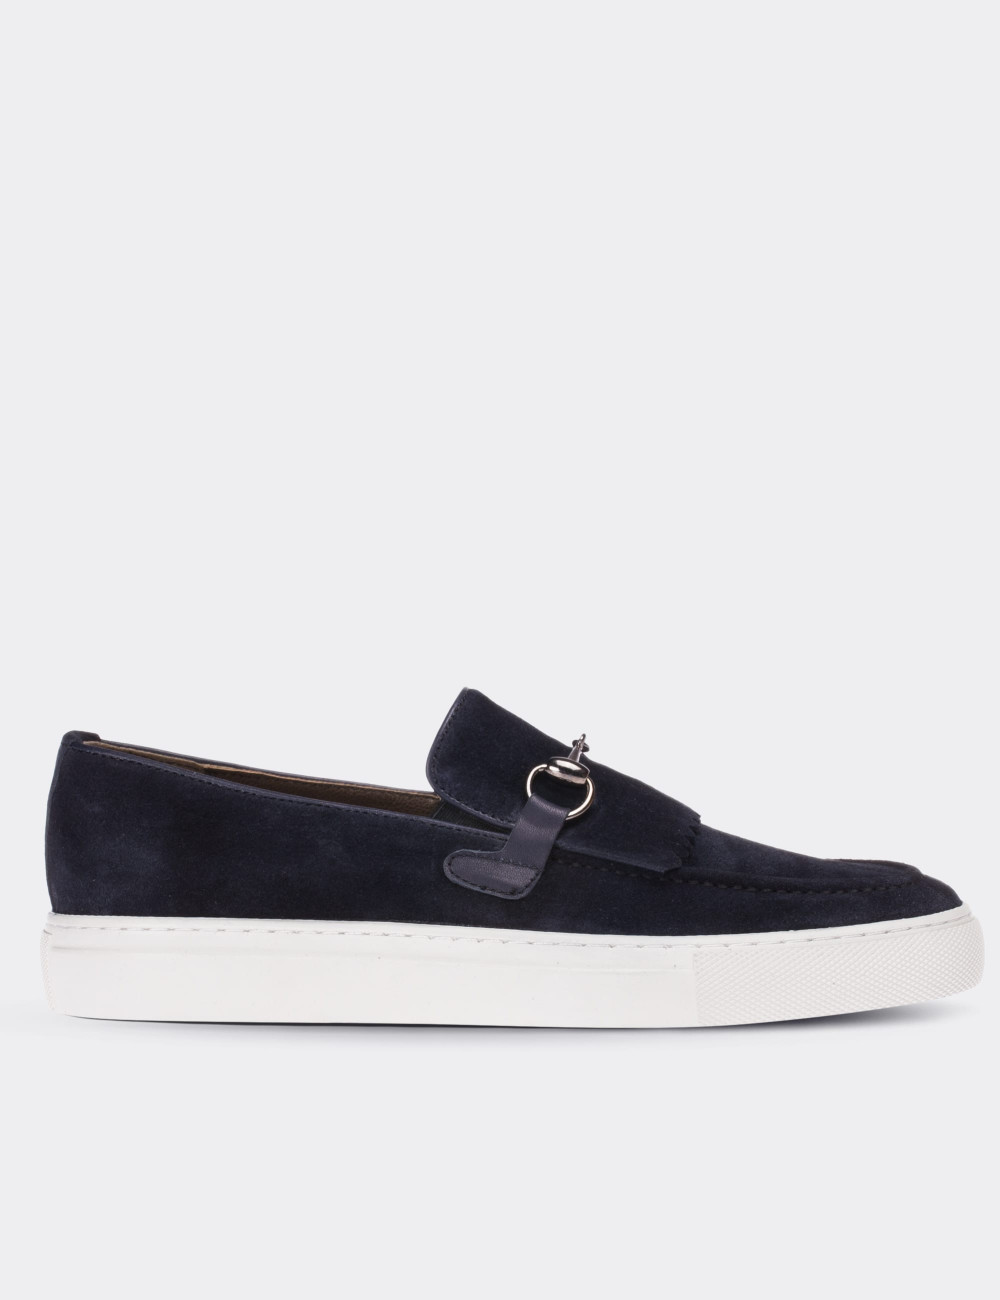 Navy Suede Leather Loafers Shoes - 01739MLCVC01